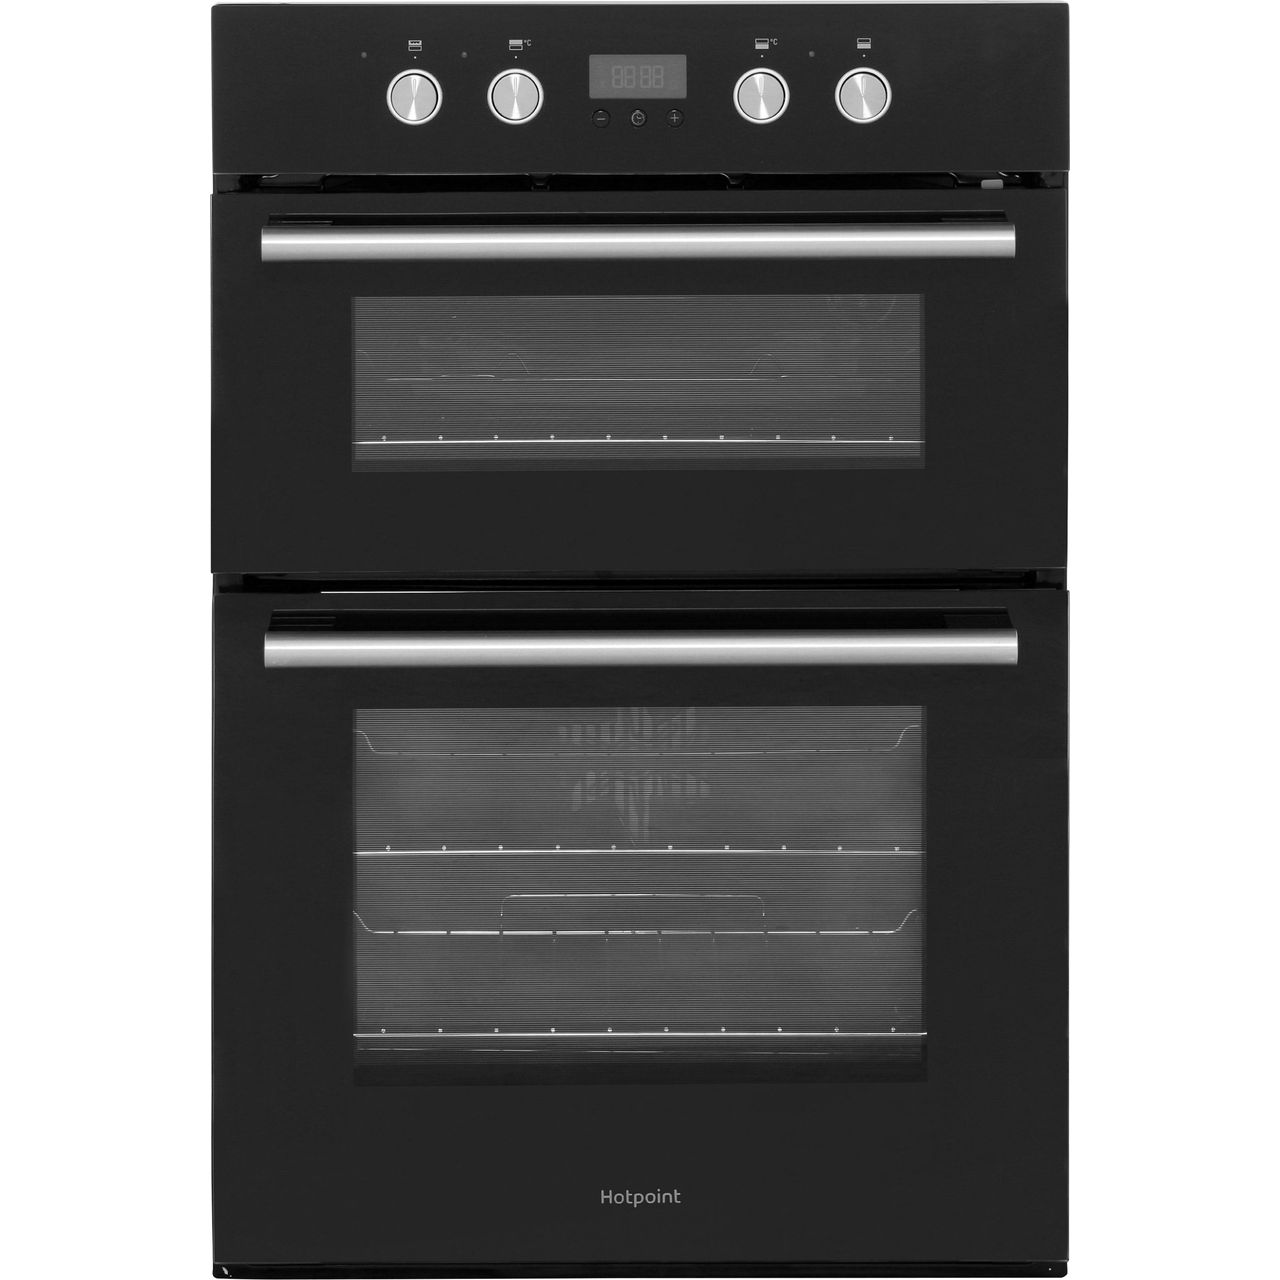 Hotpoint Class 2 DD2844CBL Integrated Double Oven in Black